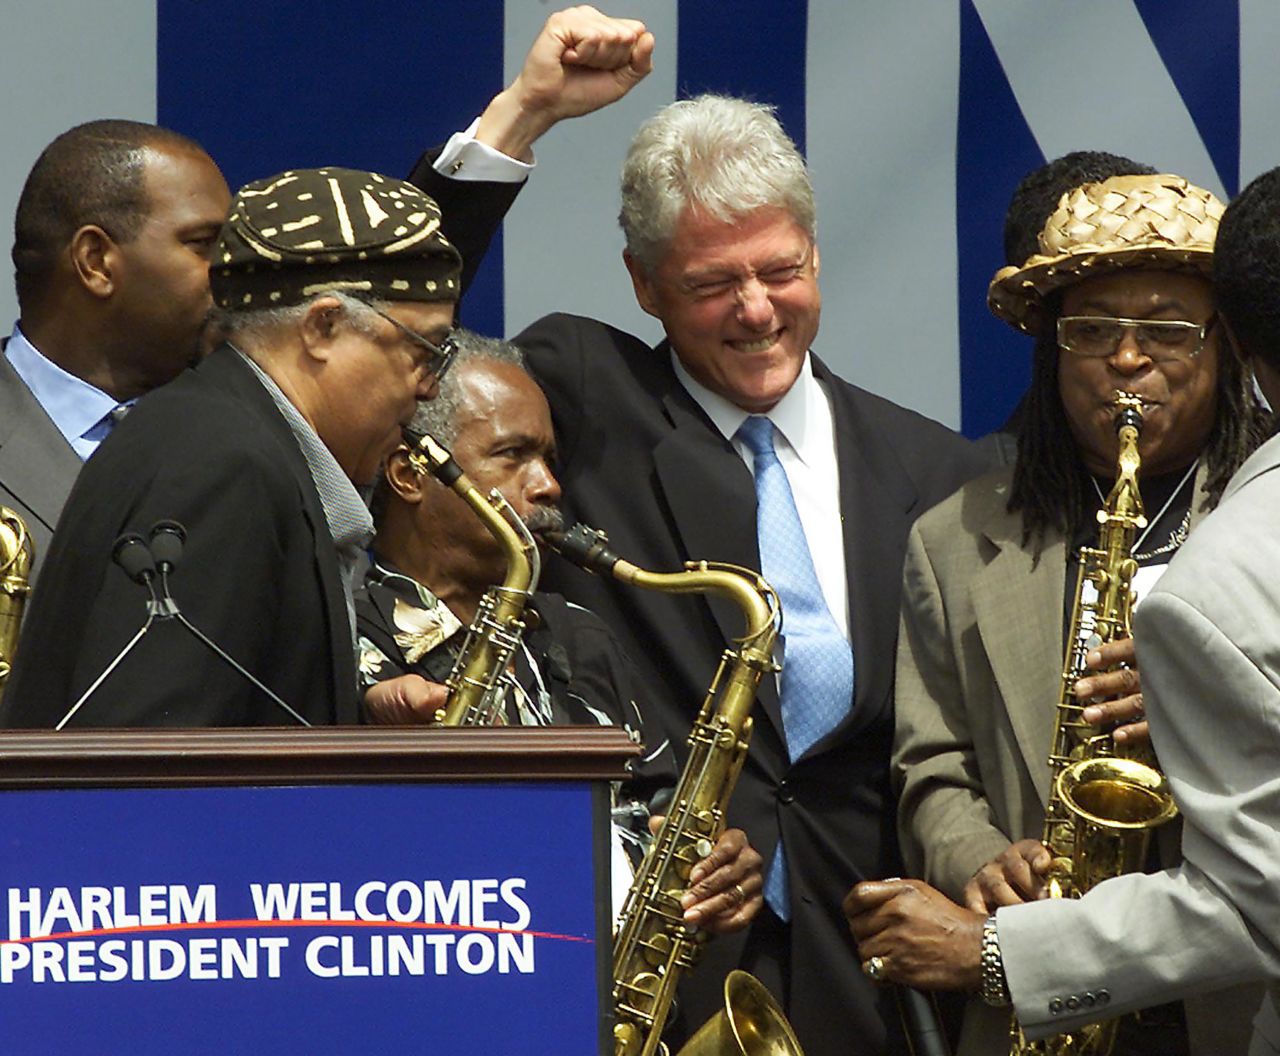 Clinton cheers a group of saxophone players at a rally in New York in July 2001. Harlem residents were welcoming Clinton, who was moving into his new post-presidential office.